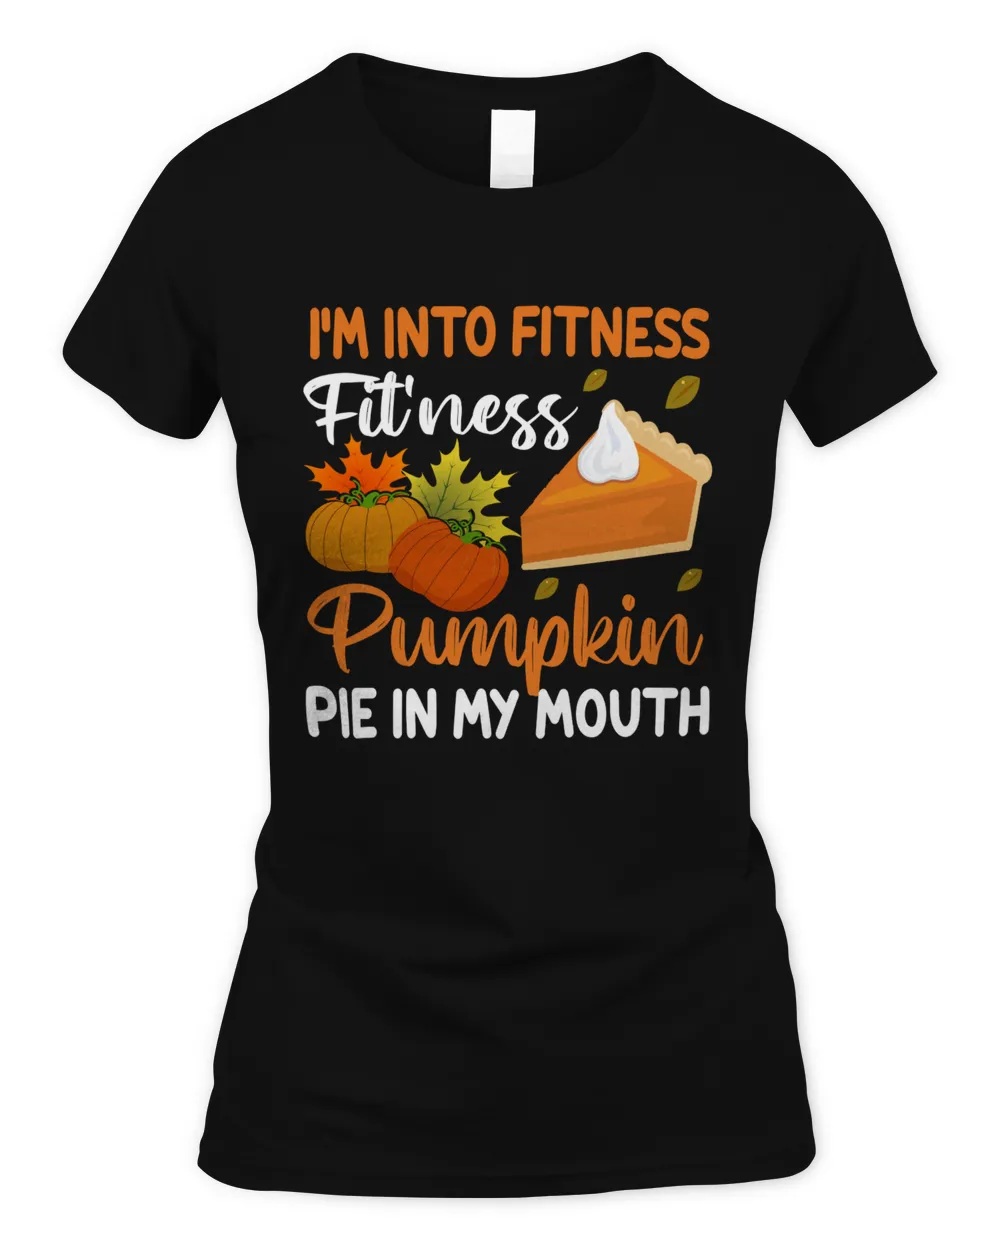 I'm into fitness fil'ness pumpkin pie in my mouth